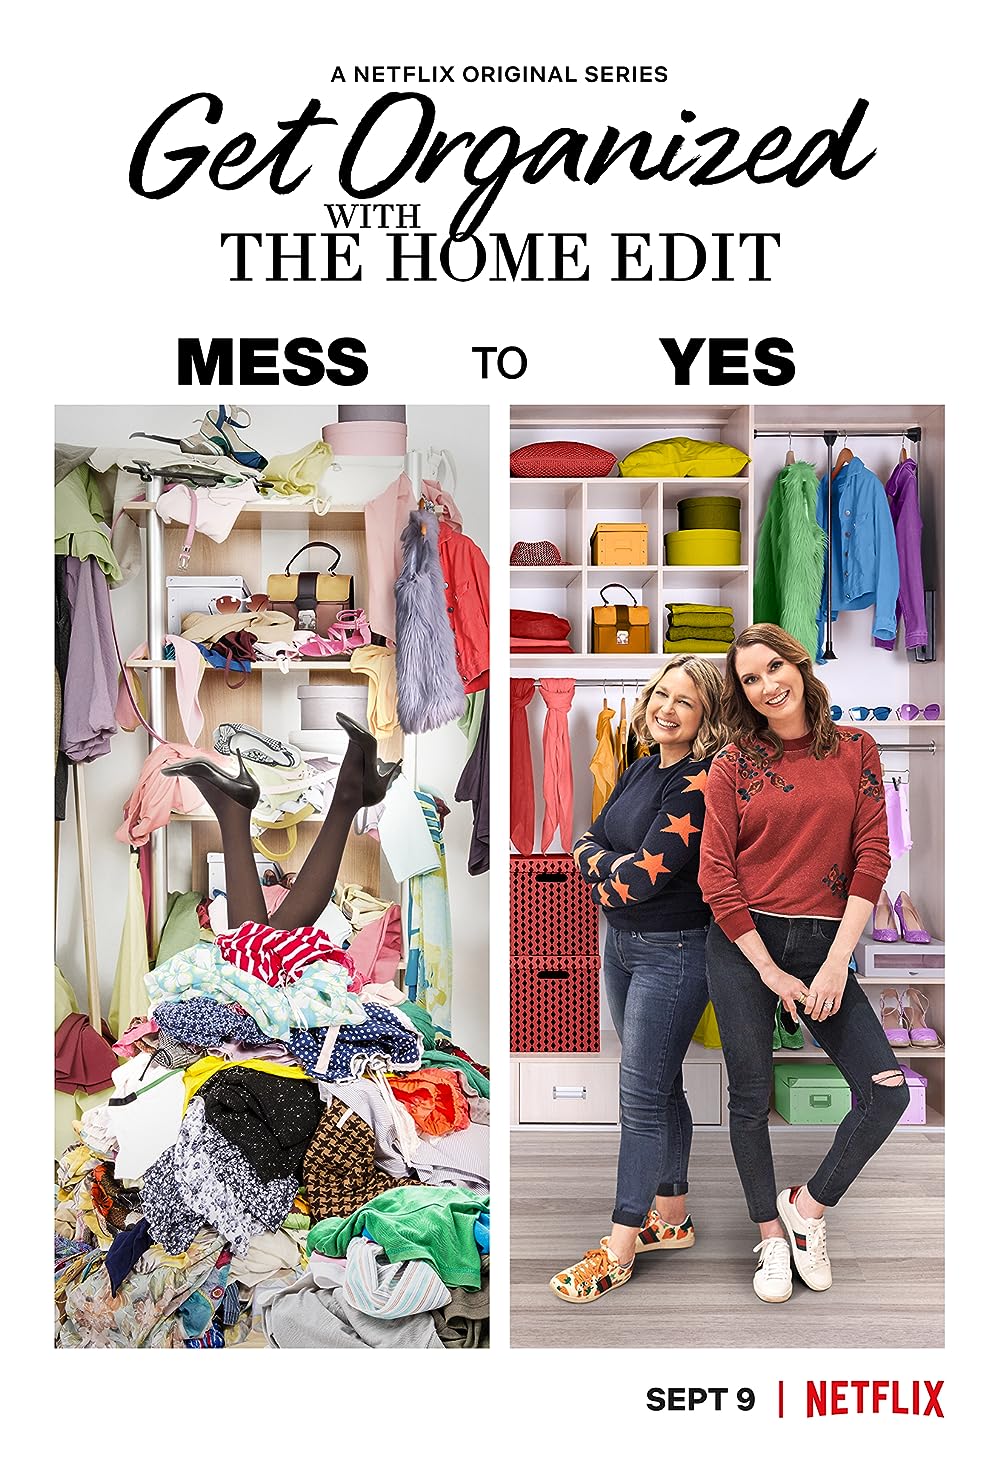 Get Organized with the Home Edit